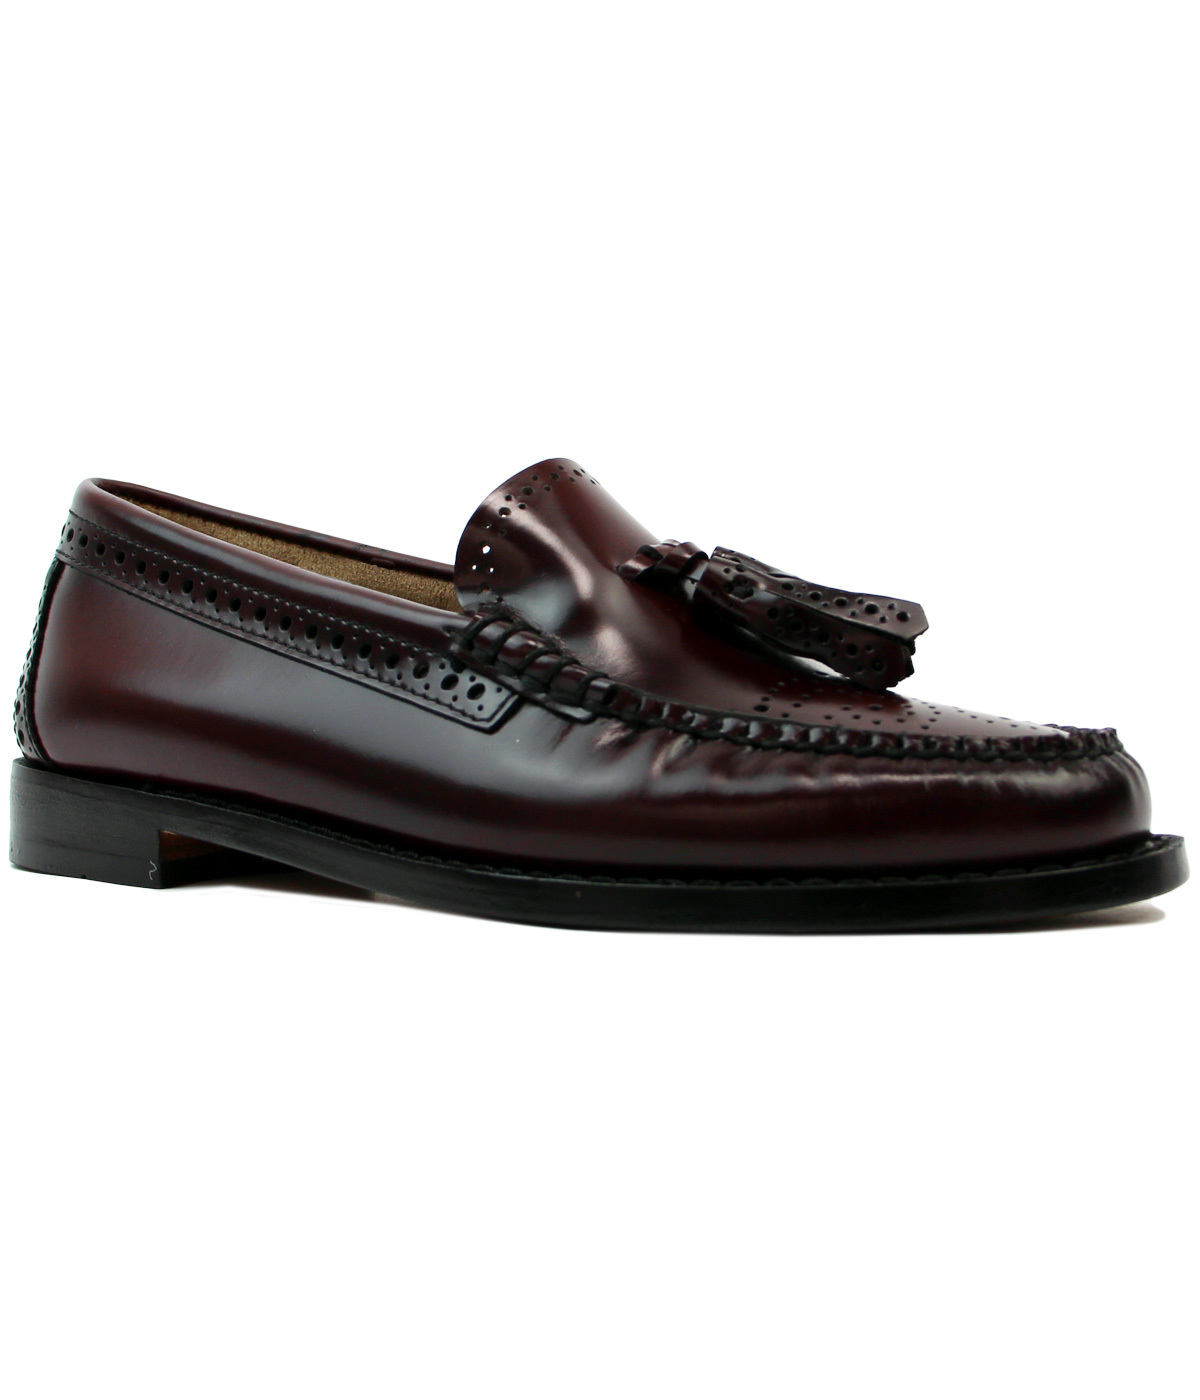 BASS WEEJUNS Estelle Retro Mod 60s Brogue Loafers in Wine